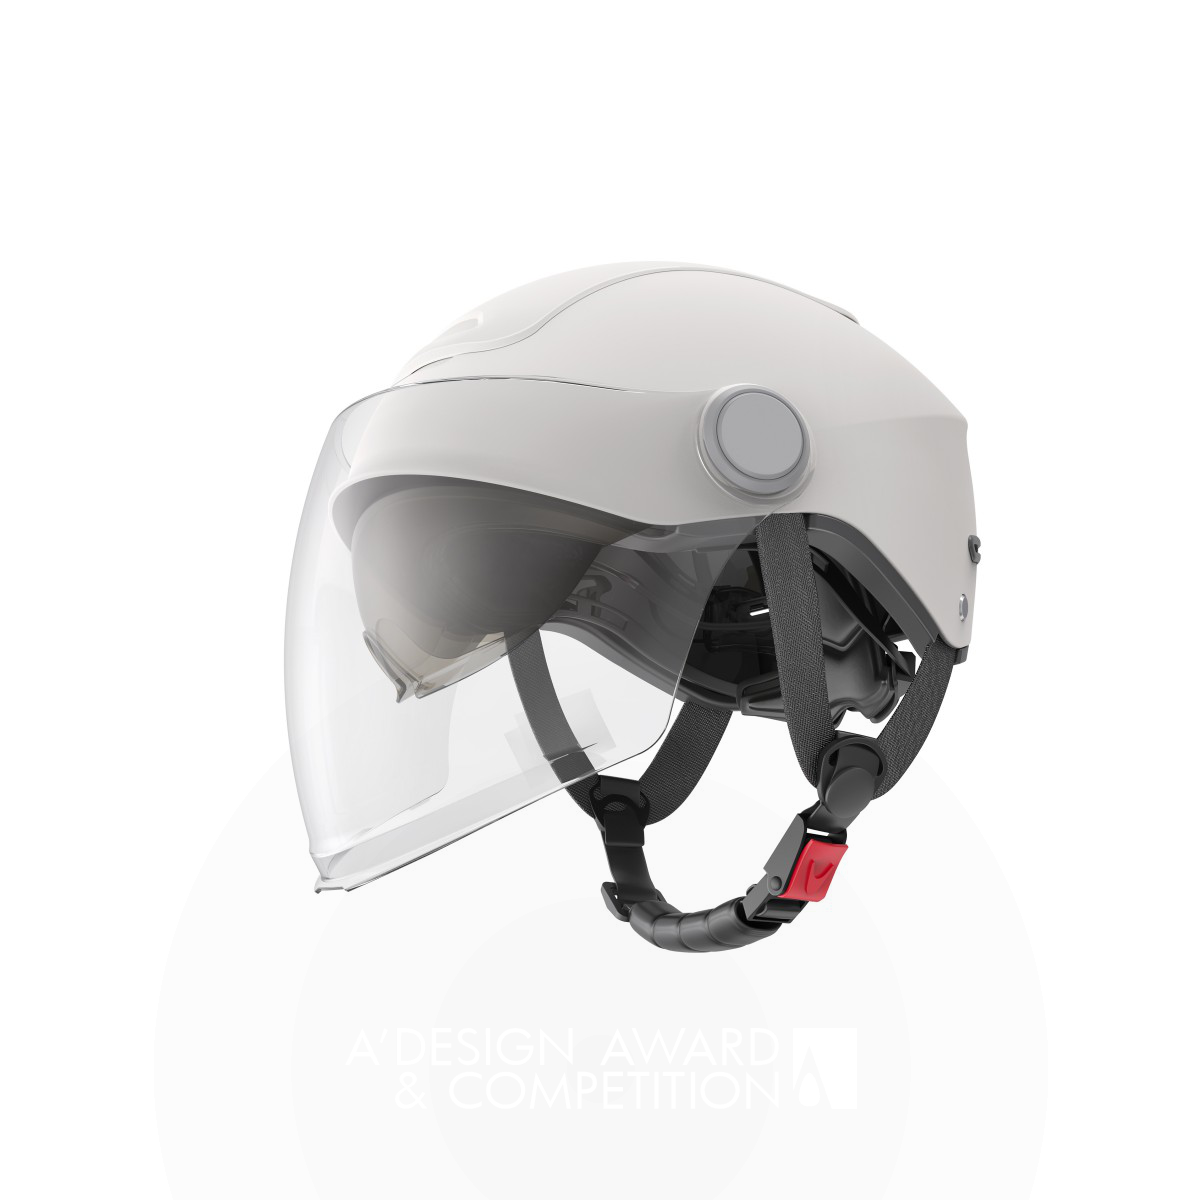 Coziro Helmet by Hangzhou Bee Sports Co., Ltd. Bronze Safety Clothing and Personal Protective Equipment Design Award Winner 2024 